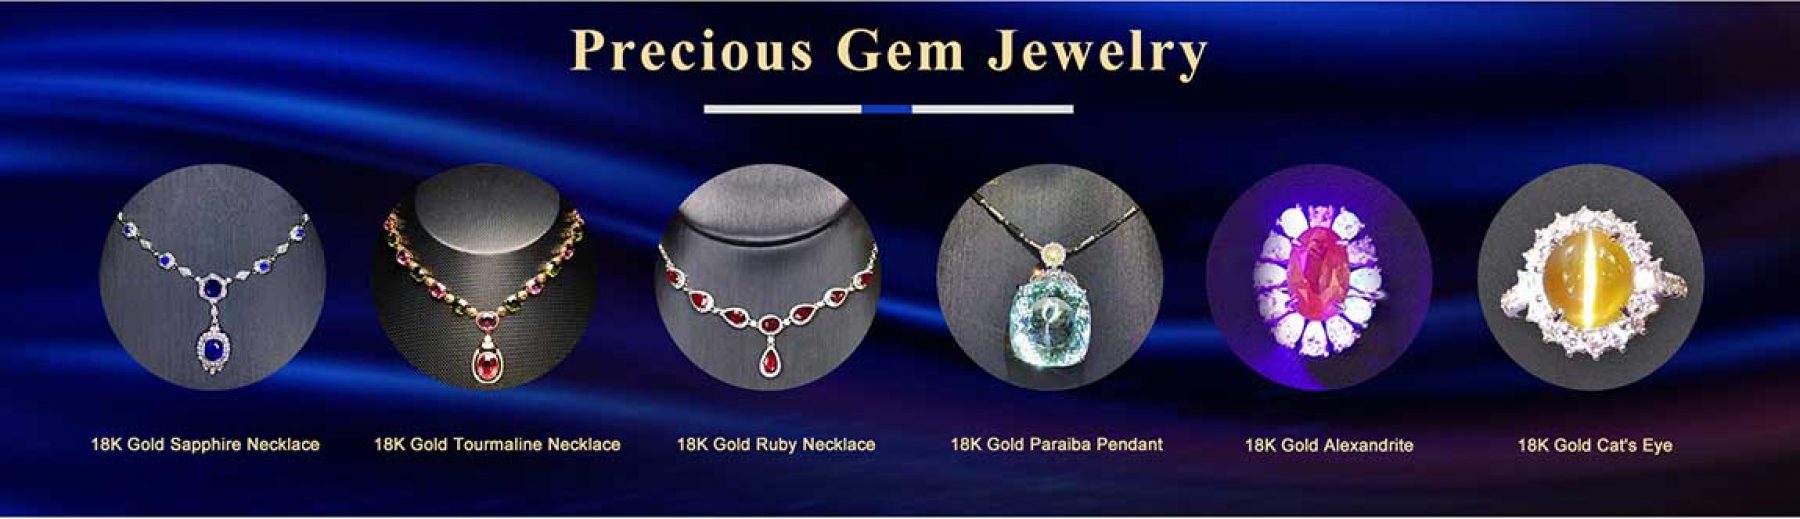 How-do-I-find-a-good-wholesale-gemstone-jewelry-supplier-for-my-business